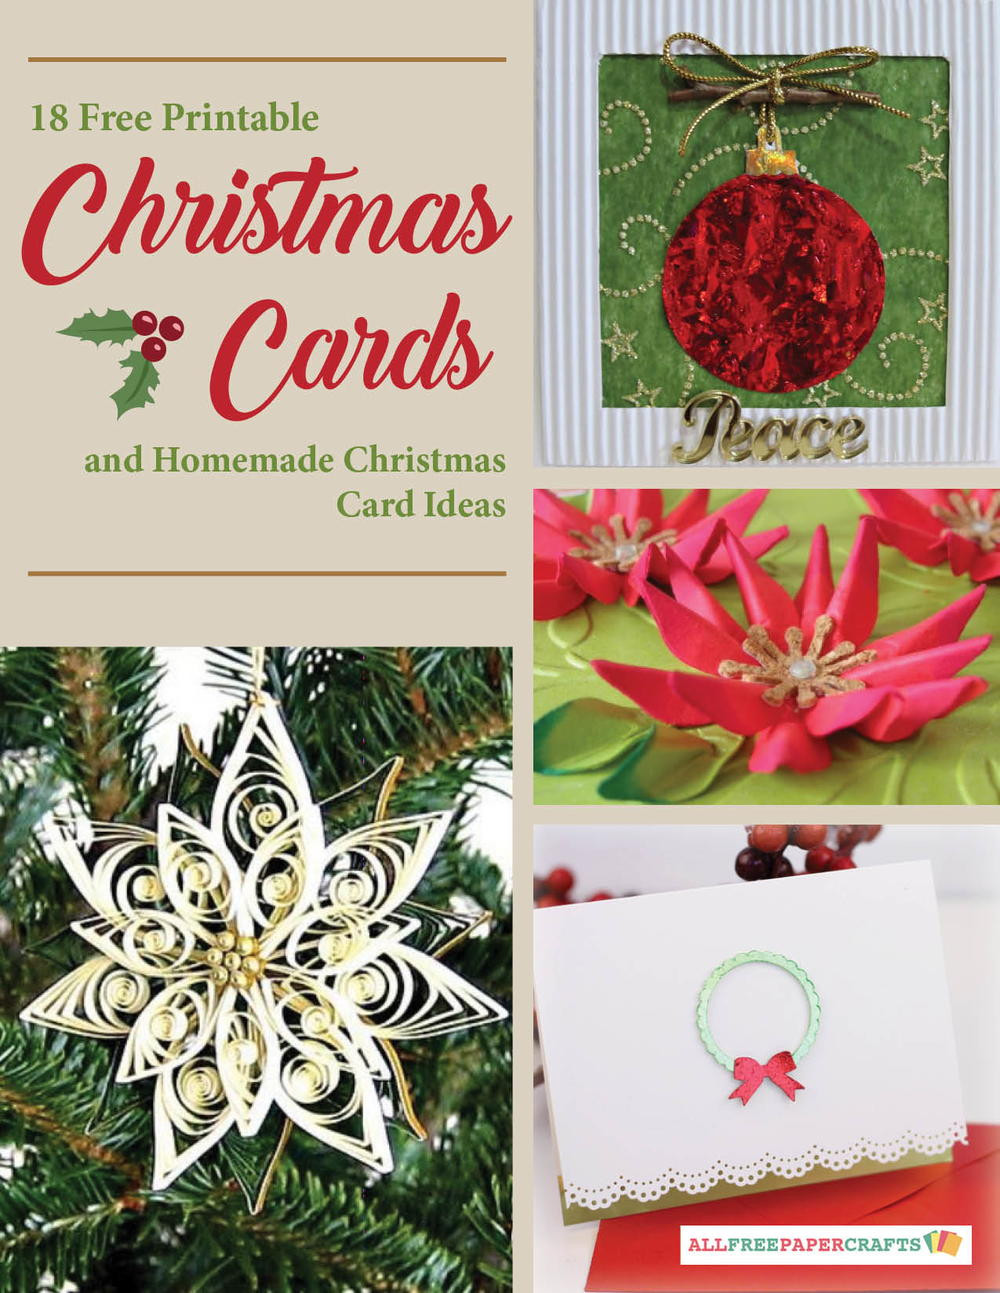 Easy Crafts And Free Printables For Xmas Cards For Kids To Make
 18 Free Printable Christmas Cards and Homemade Christmas